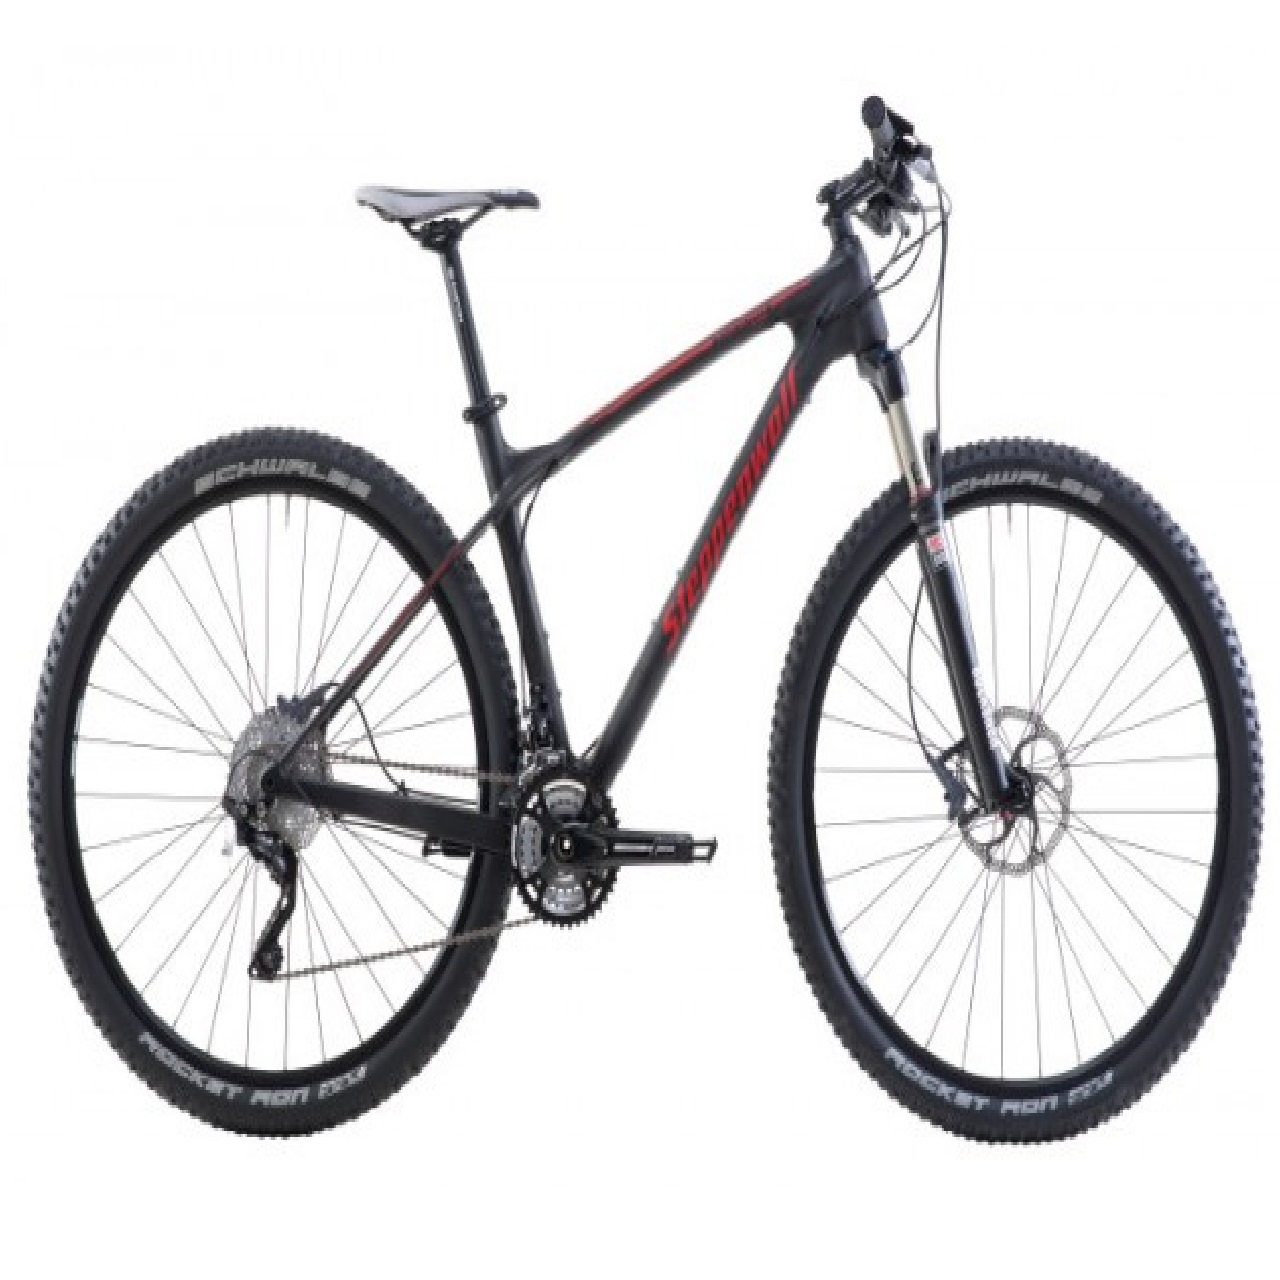 Steppenwolf Tundra Carbon Pro Hardtail 29er Shimano MTB Bicycle front suspension